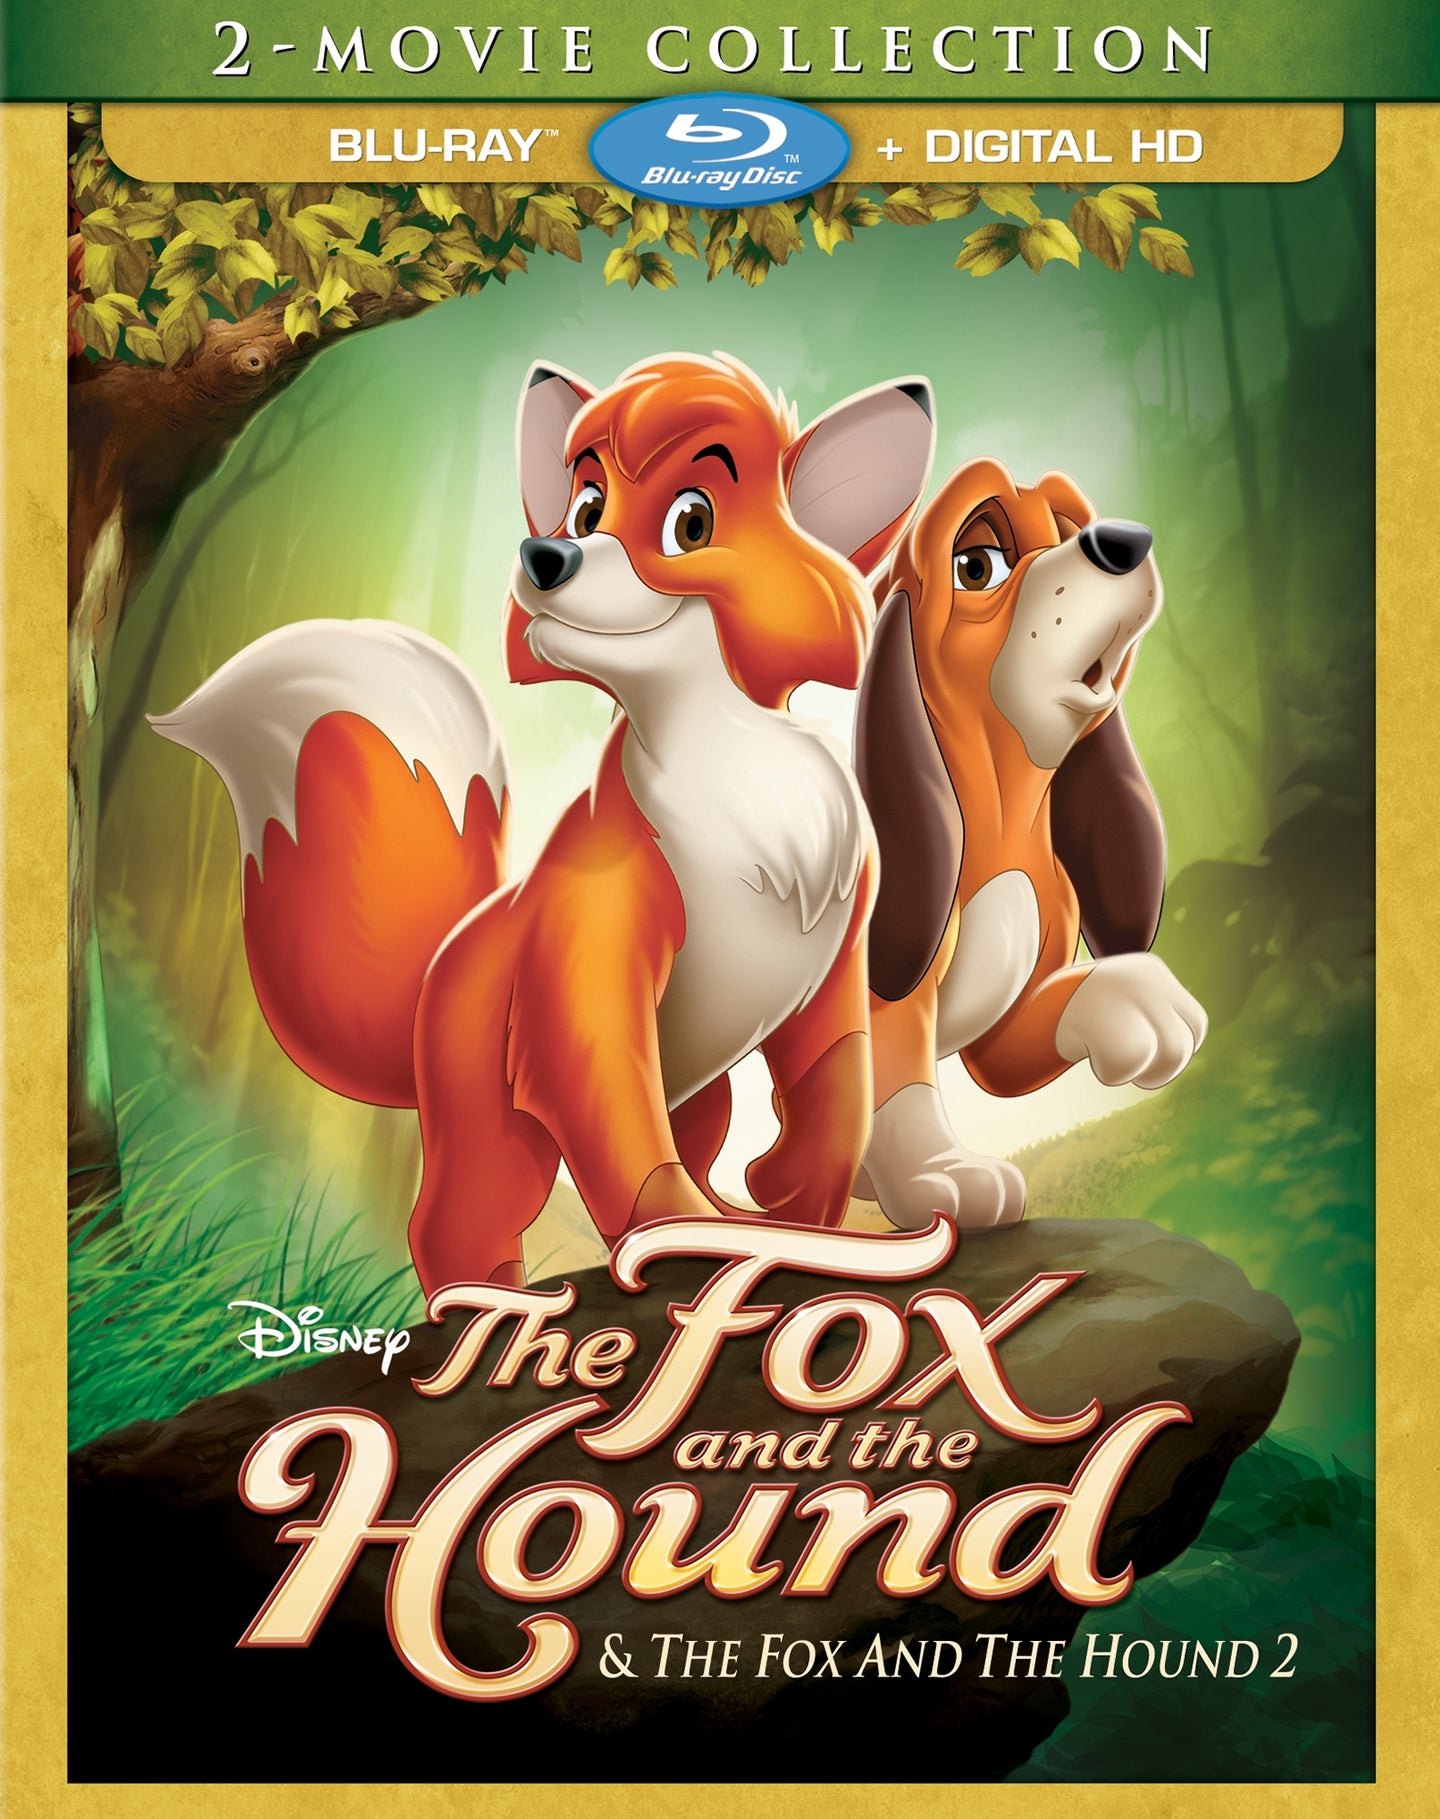 The Fox and the Hound: 2-Film Collection (1981; 2006) Vudu or Movies Anywhere HD redemption only